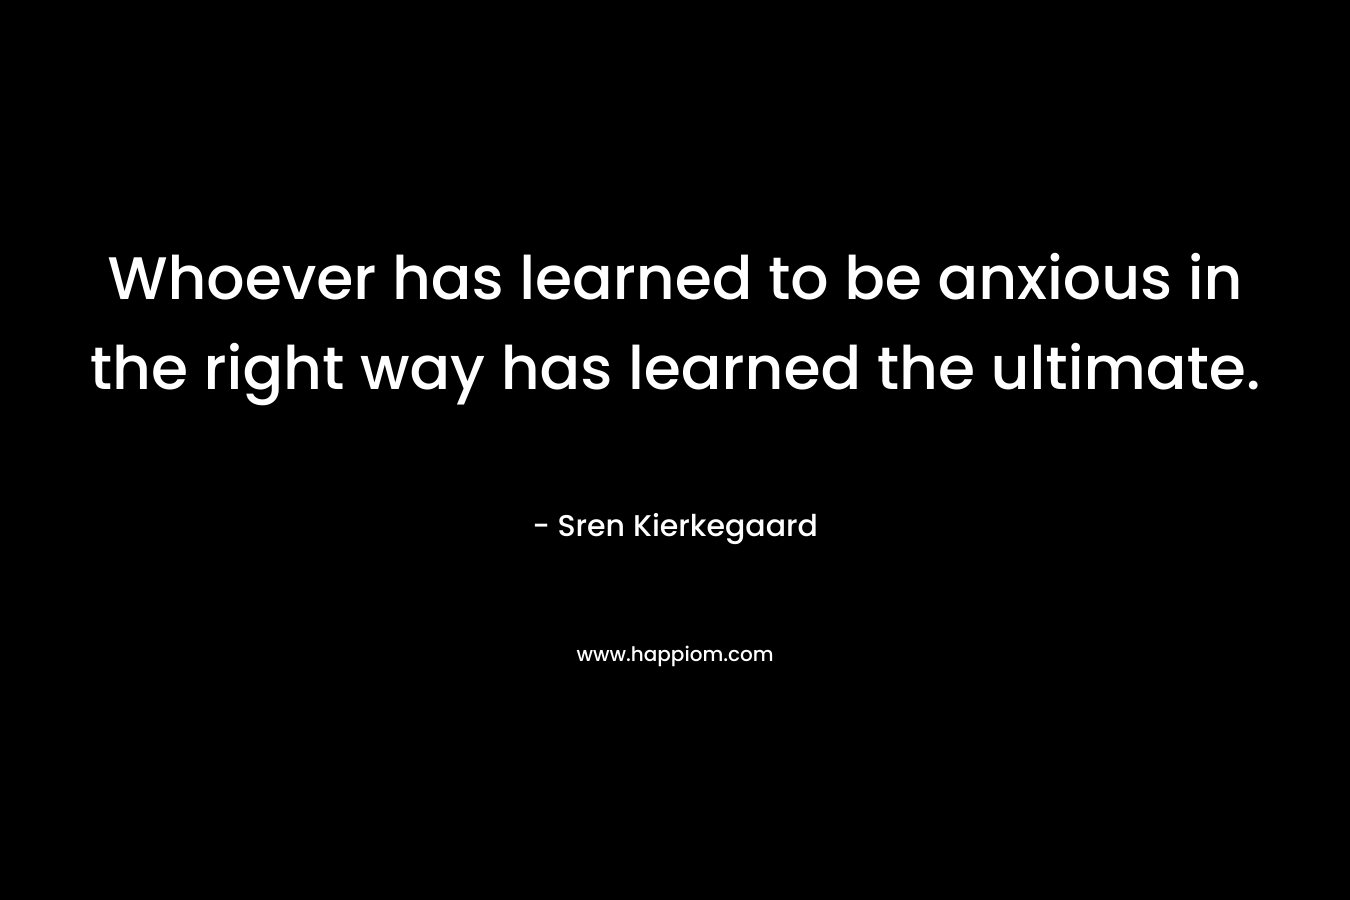 Whoever has learned to be anxious in the right way has learned the ultimate.